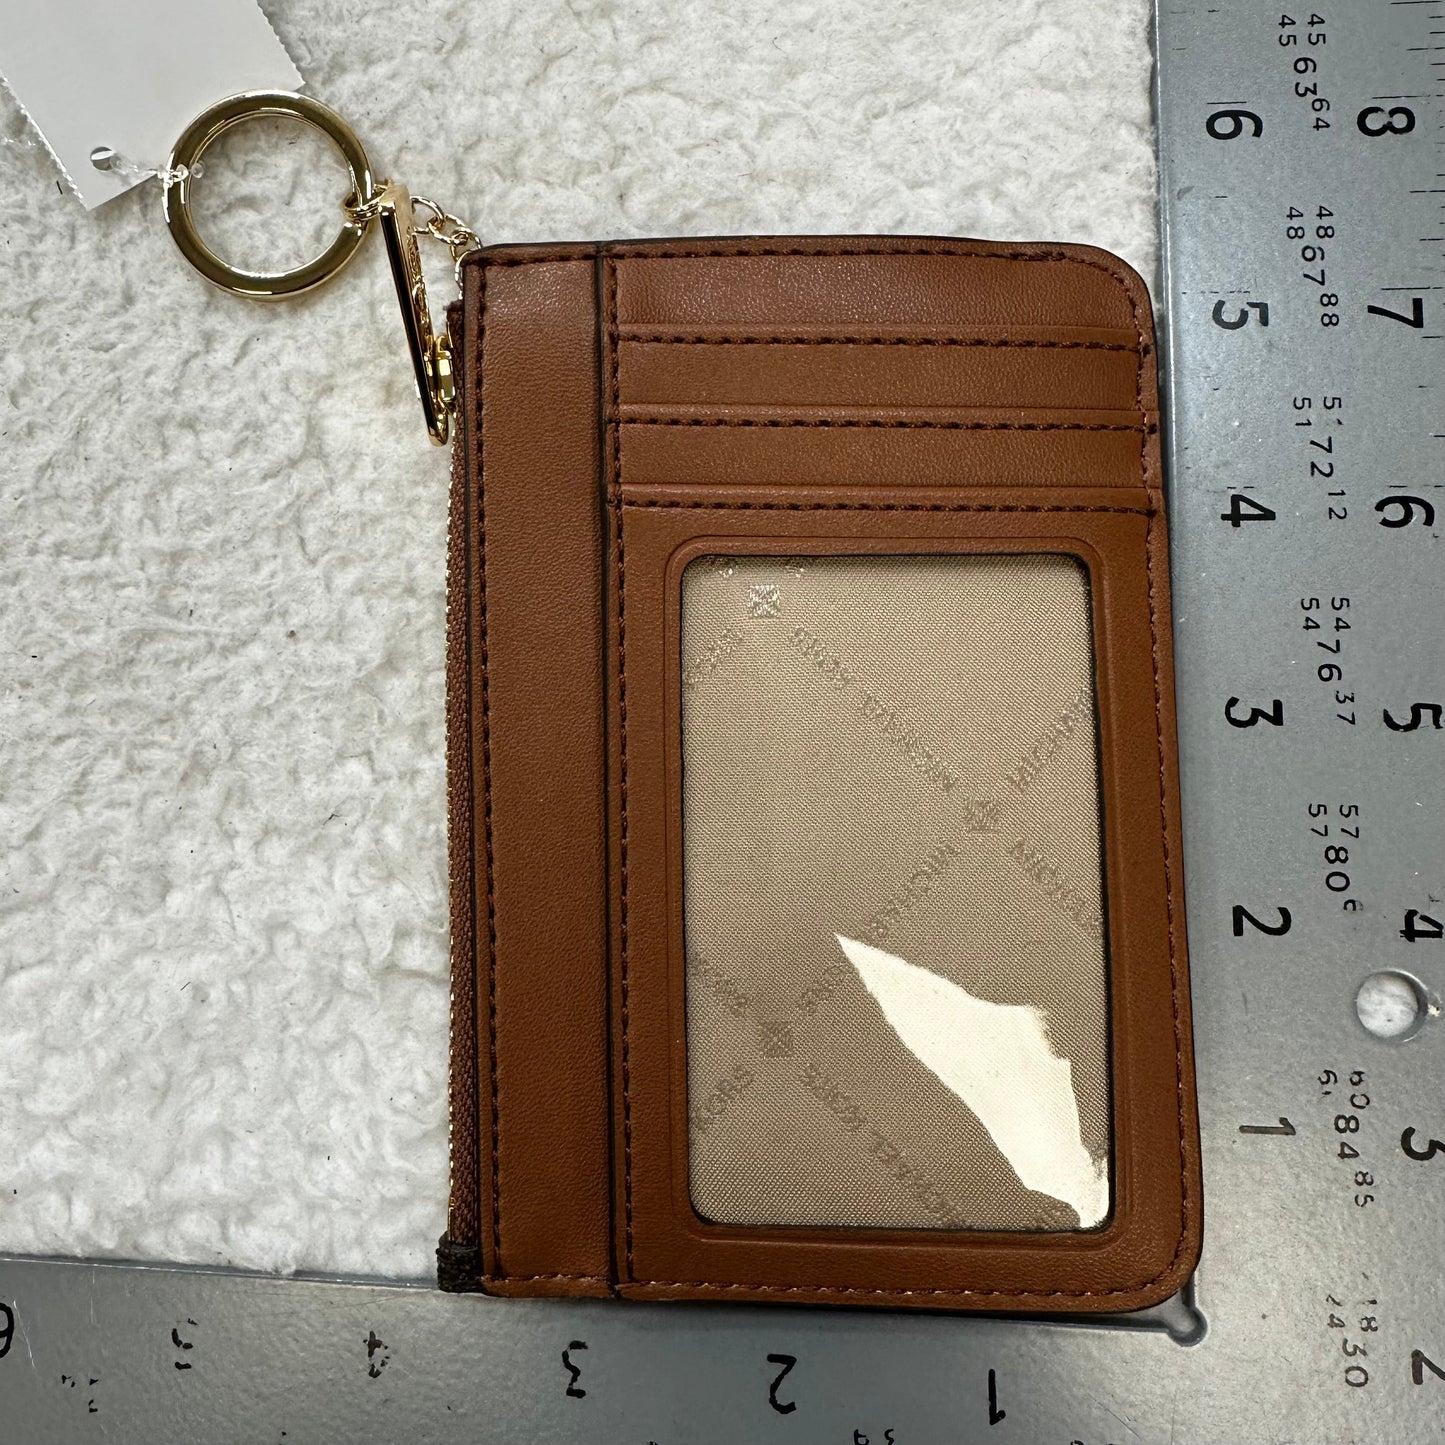 Coin Purse Michael Kors, Size Small